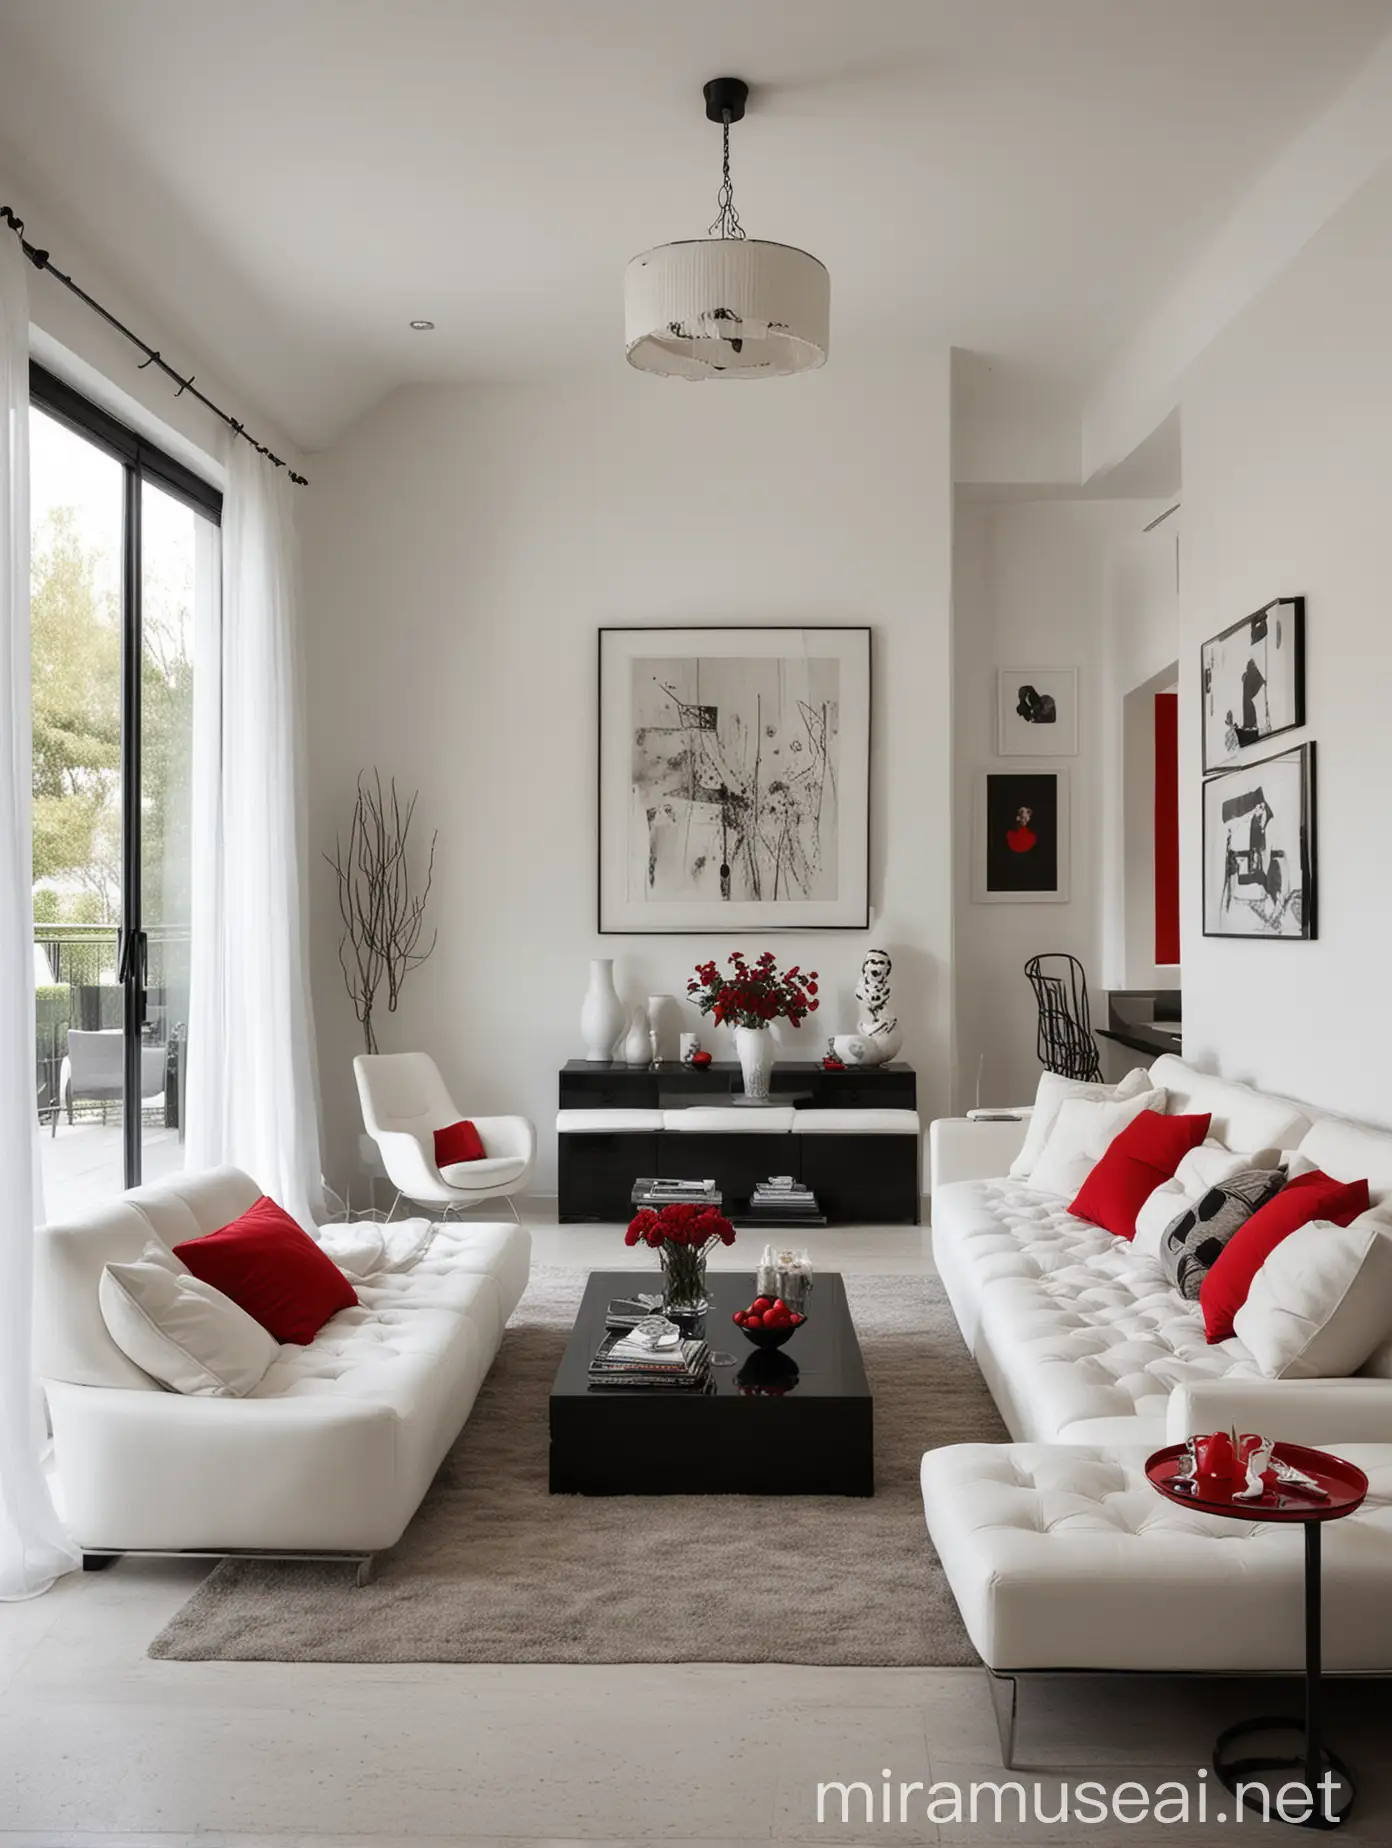 Luxurious Modern Mansion Interior with Red and Black Furniture